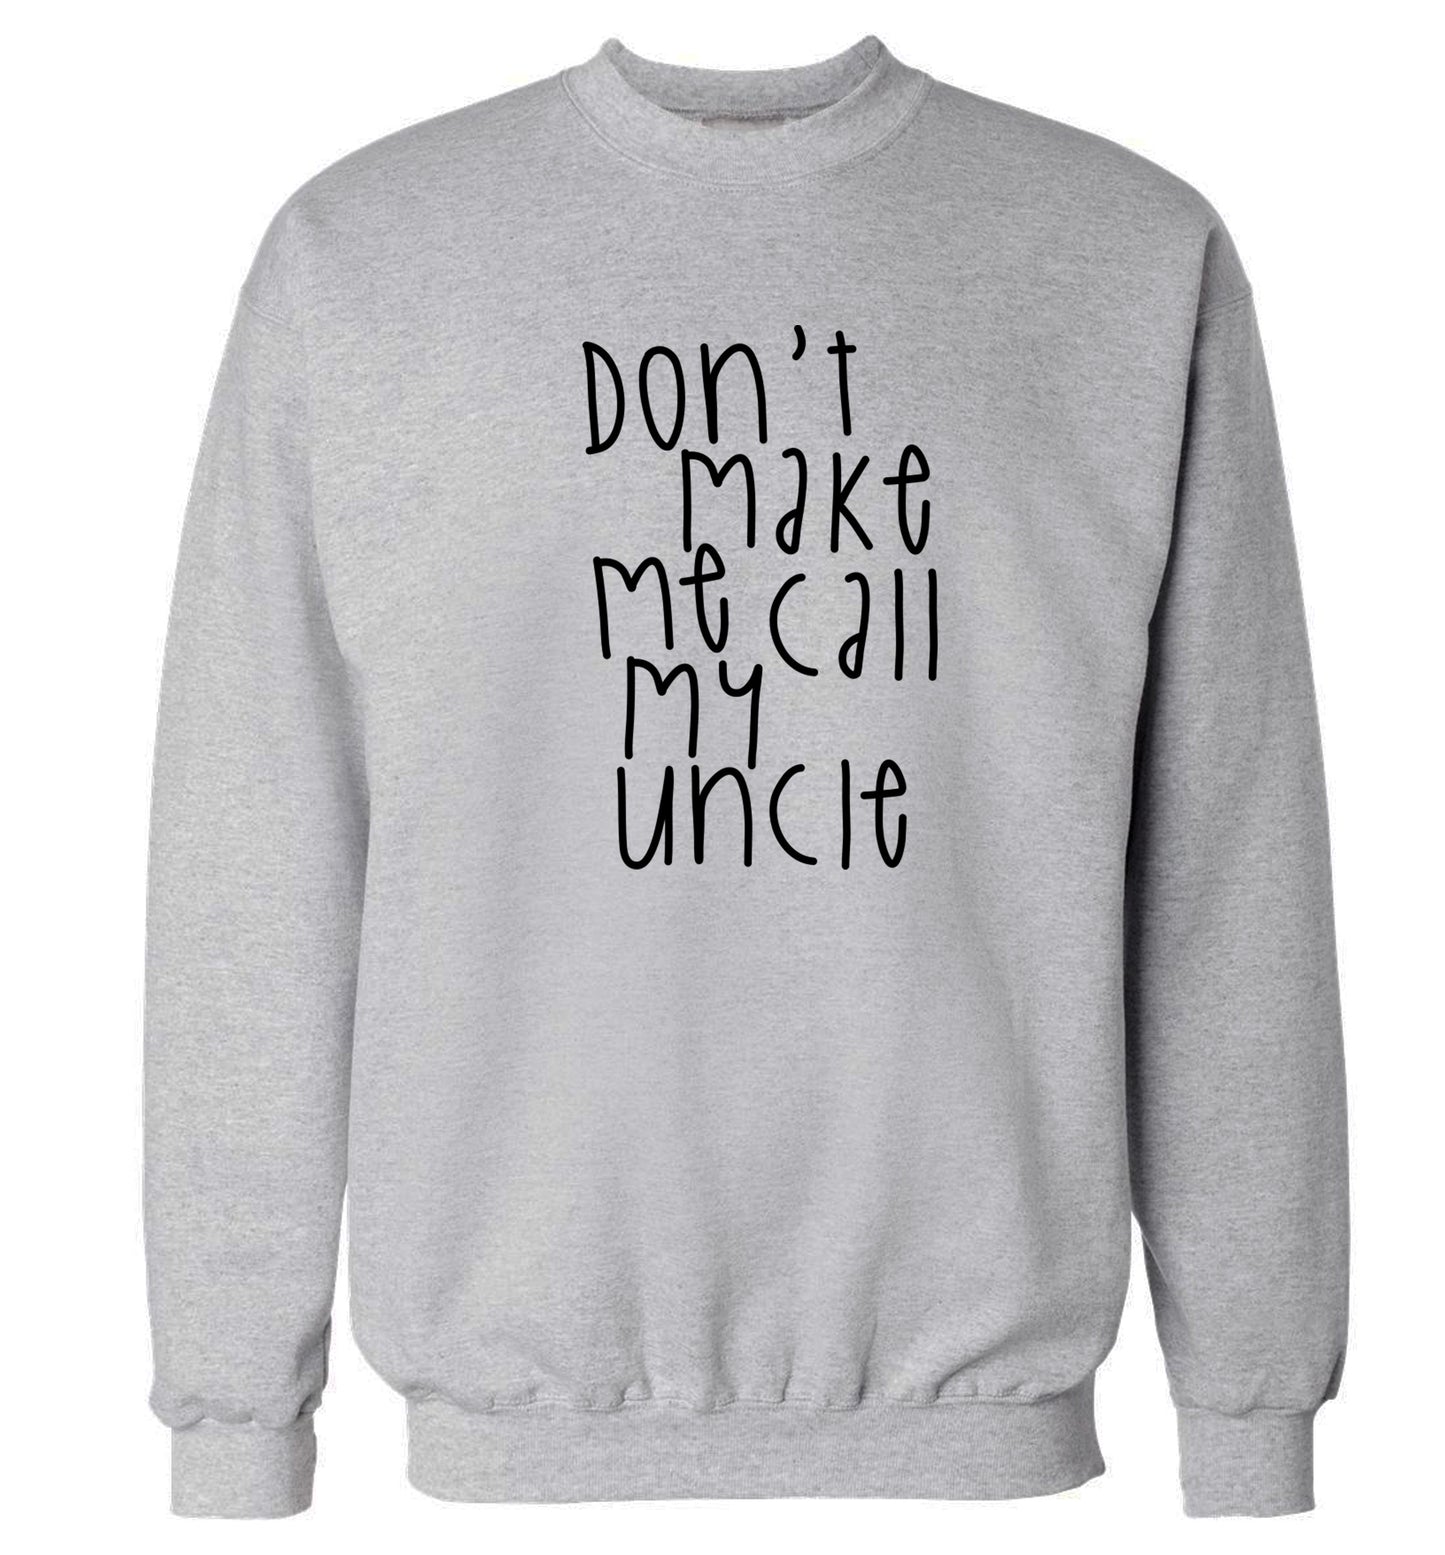 Don't make me call my uncle Adult's unisex grey Sweater 2XL